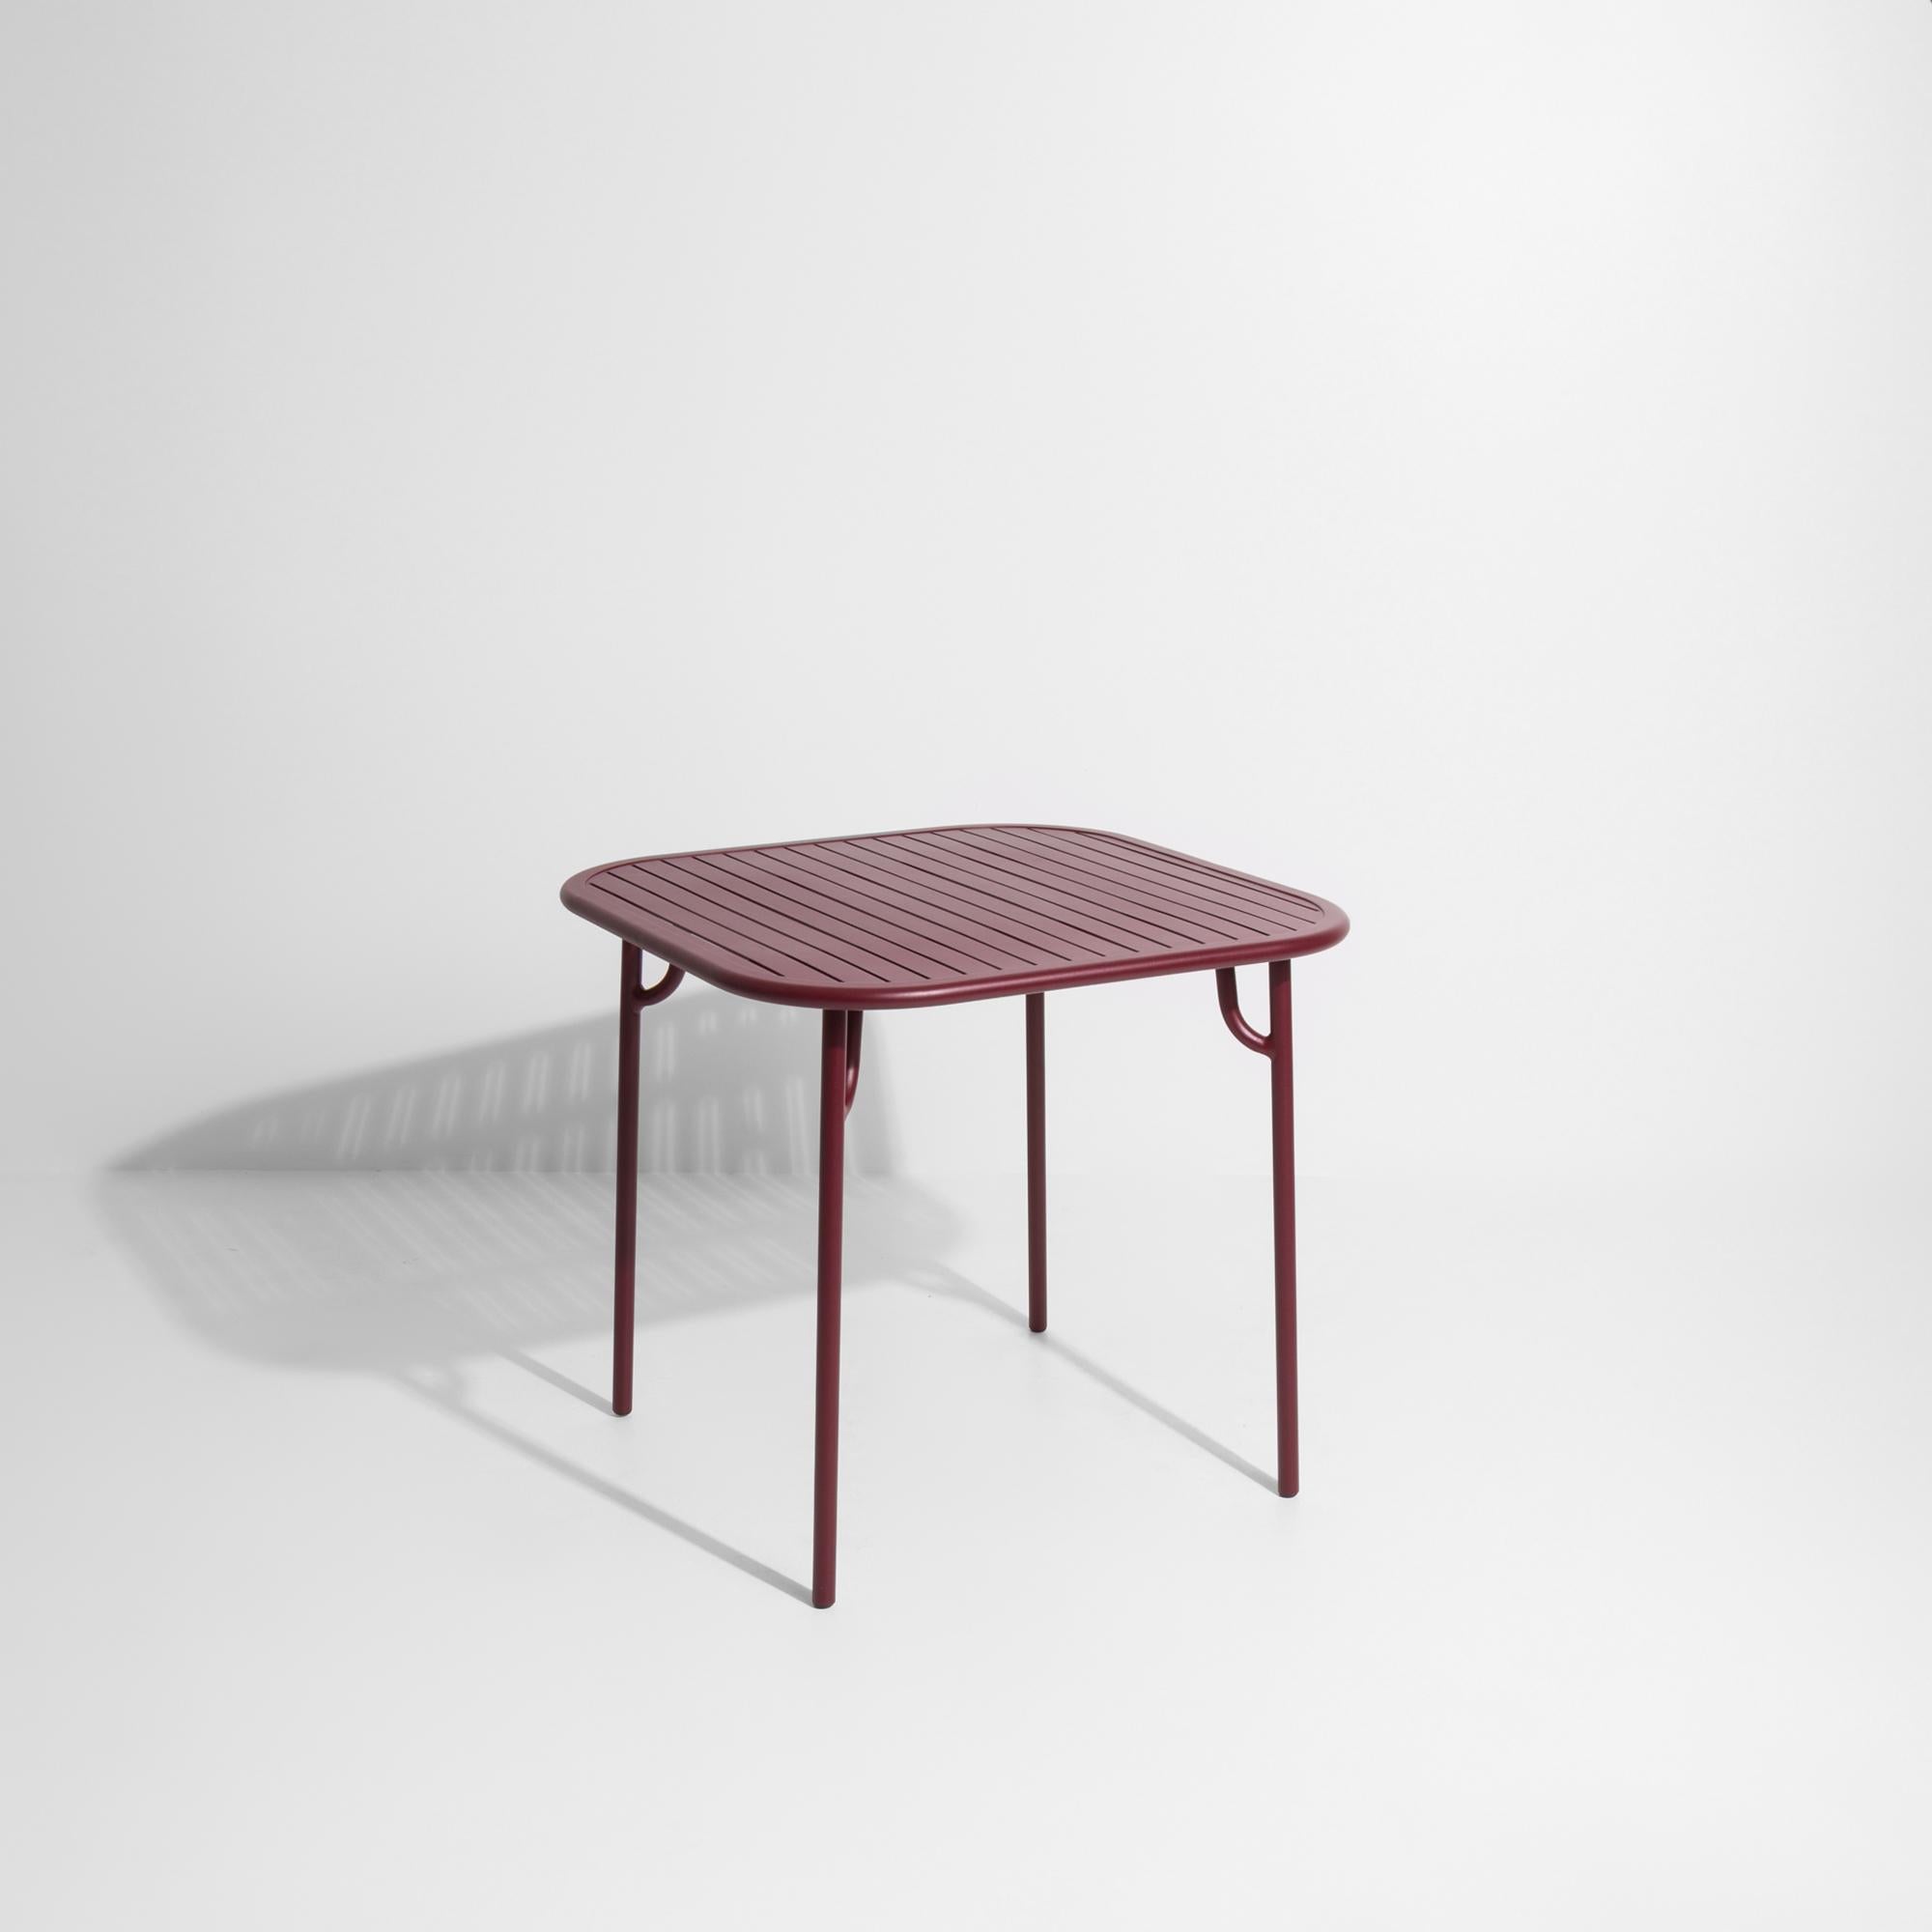 Chinese Petite Friture Week-End Square Dining Table in Burgundy Aluminium with Slats For Sale